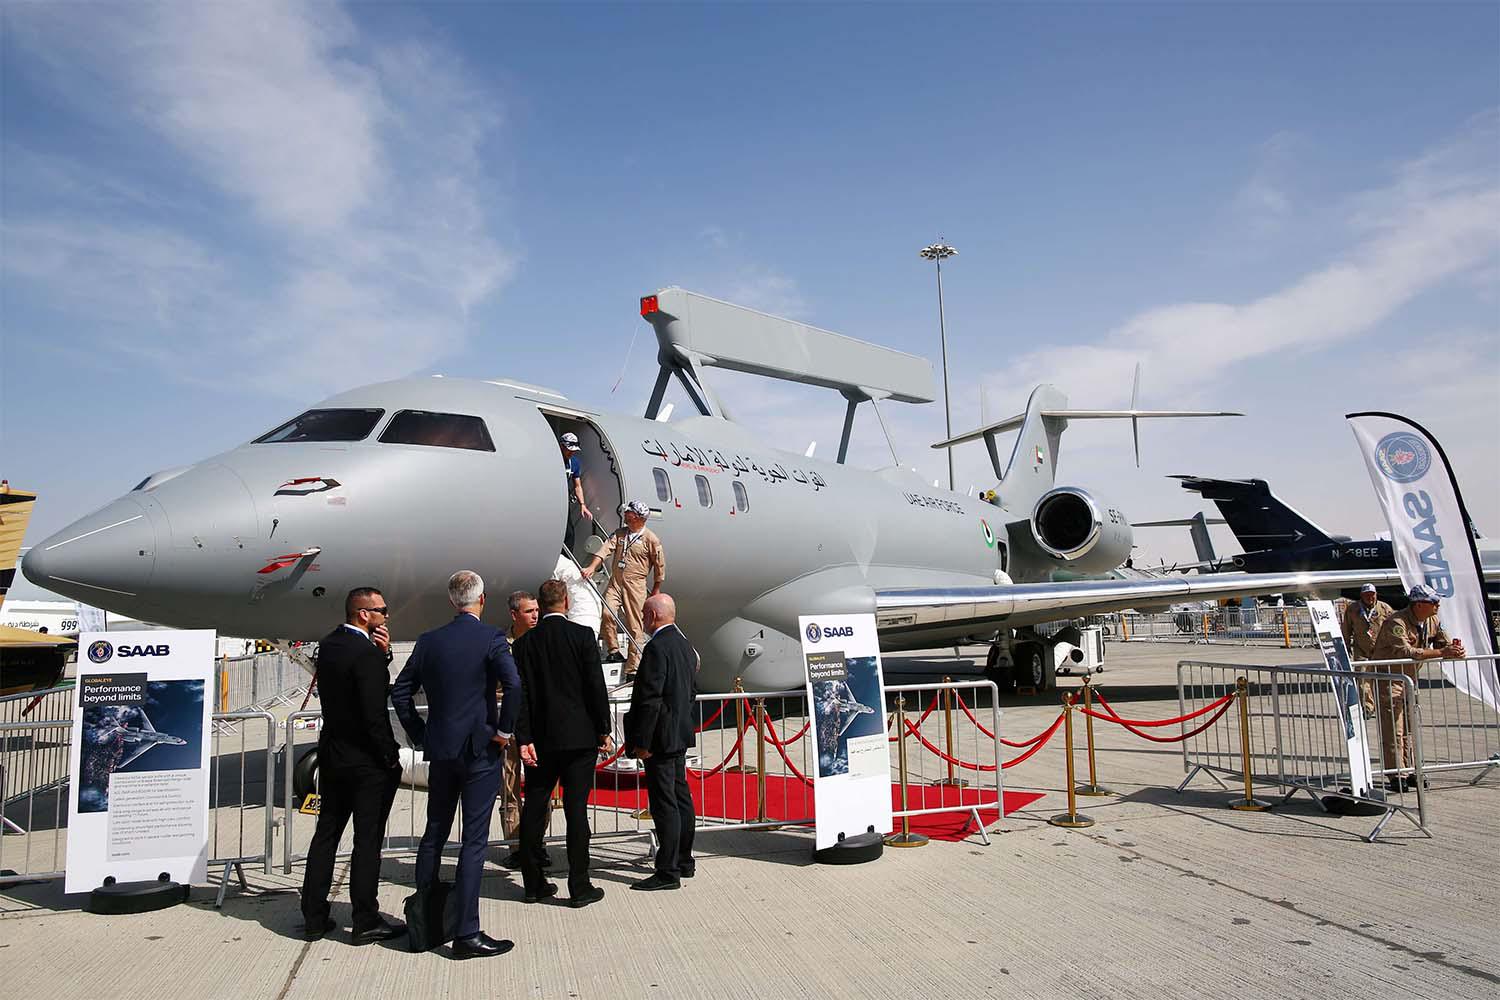 The new surveillance jet GlobalEye is on display during Dubai Air Show 